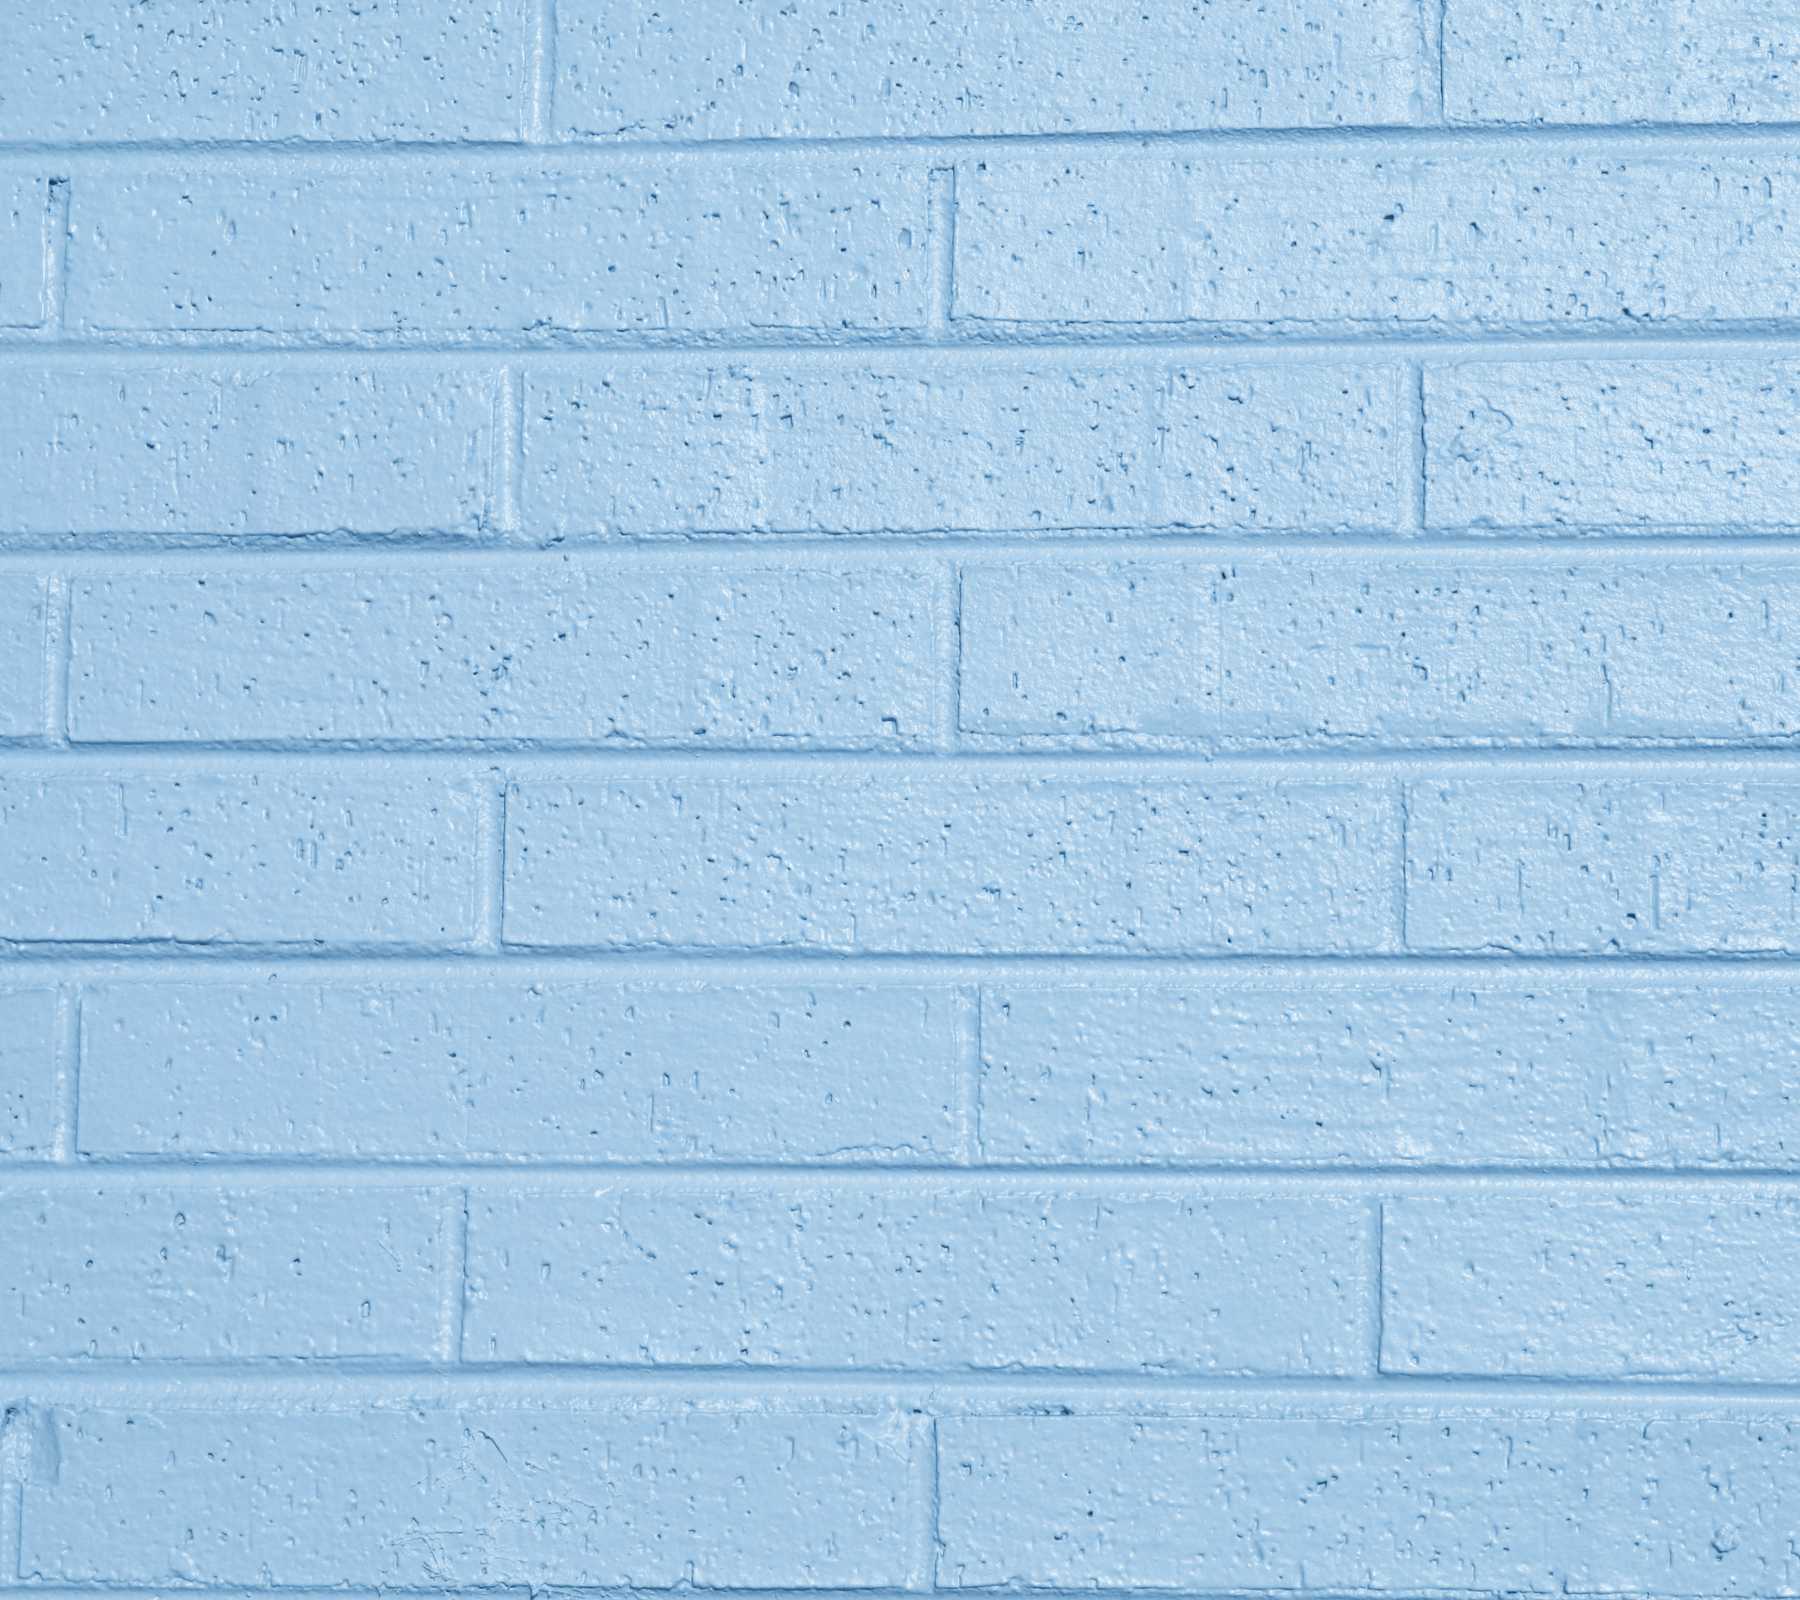 Baby Blue Painted Brick Wall Background Image, Wallpaper or ...